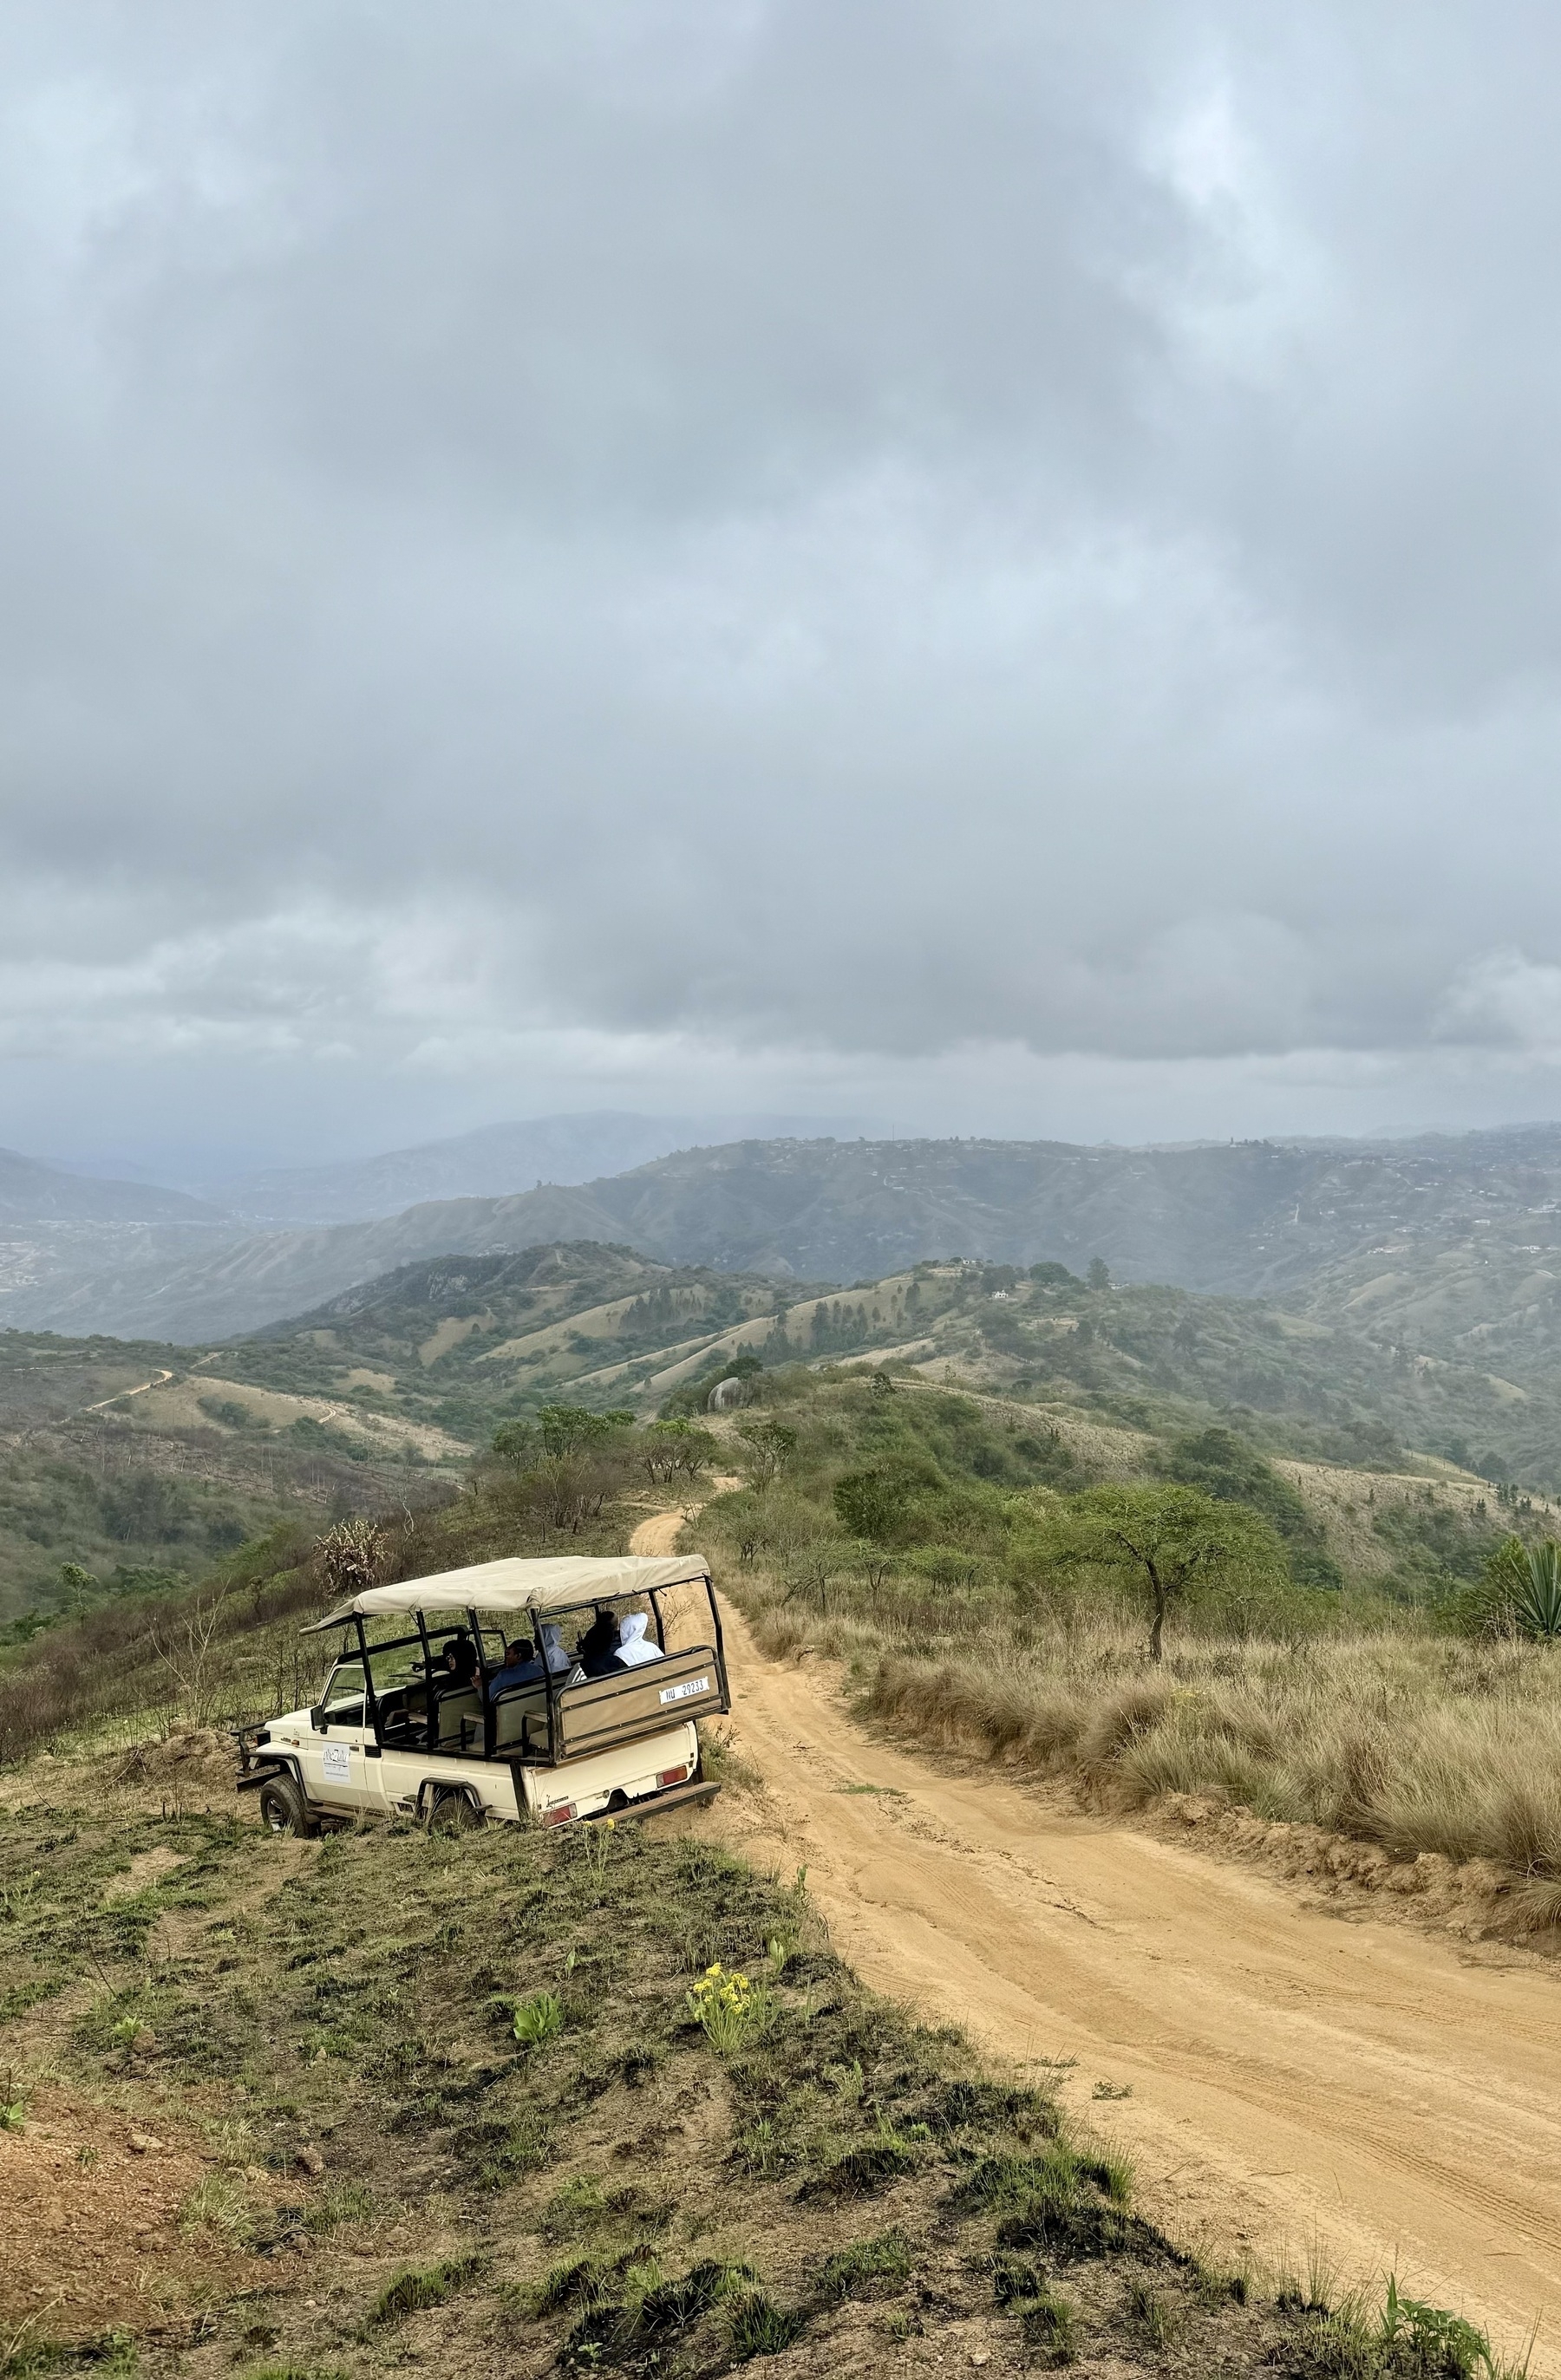 A jeep pulled over to the side of a dirt road that leads off into the hills, with clouds above.